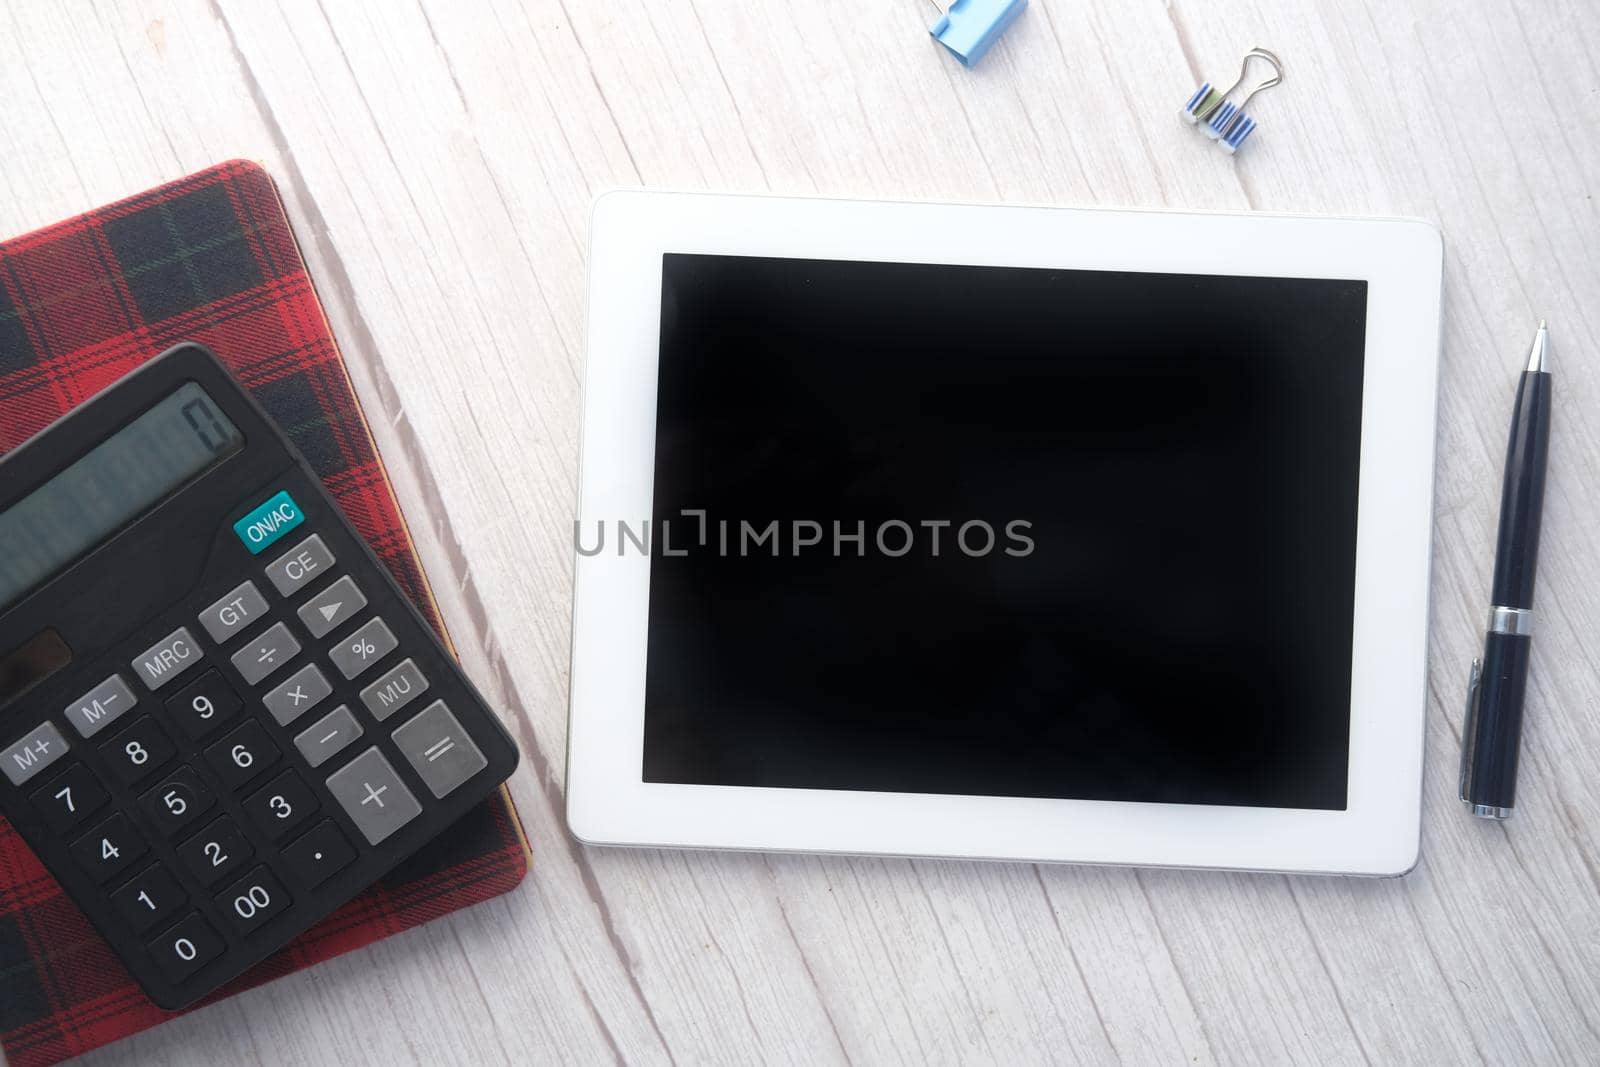 Flat composition of digital tablet and office stationary on black background .